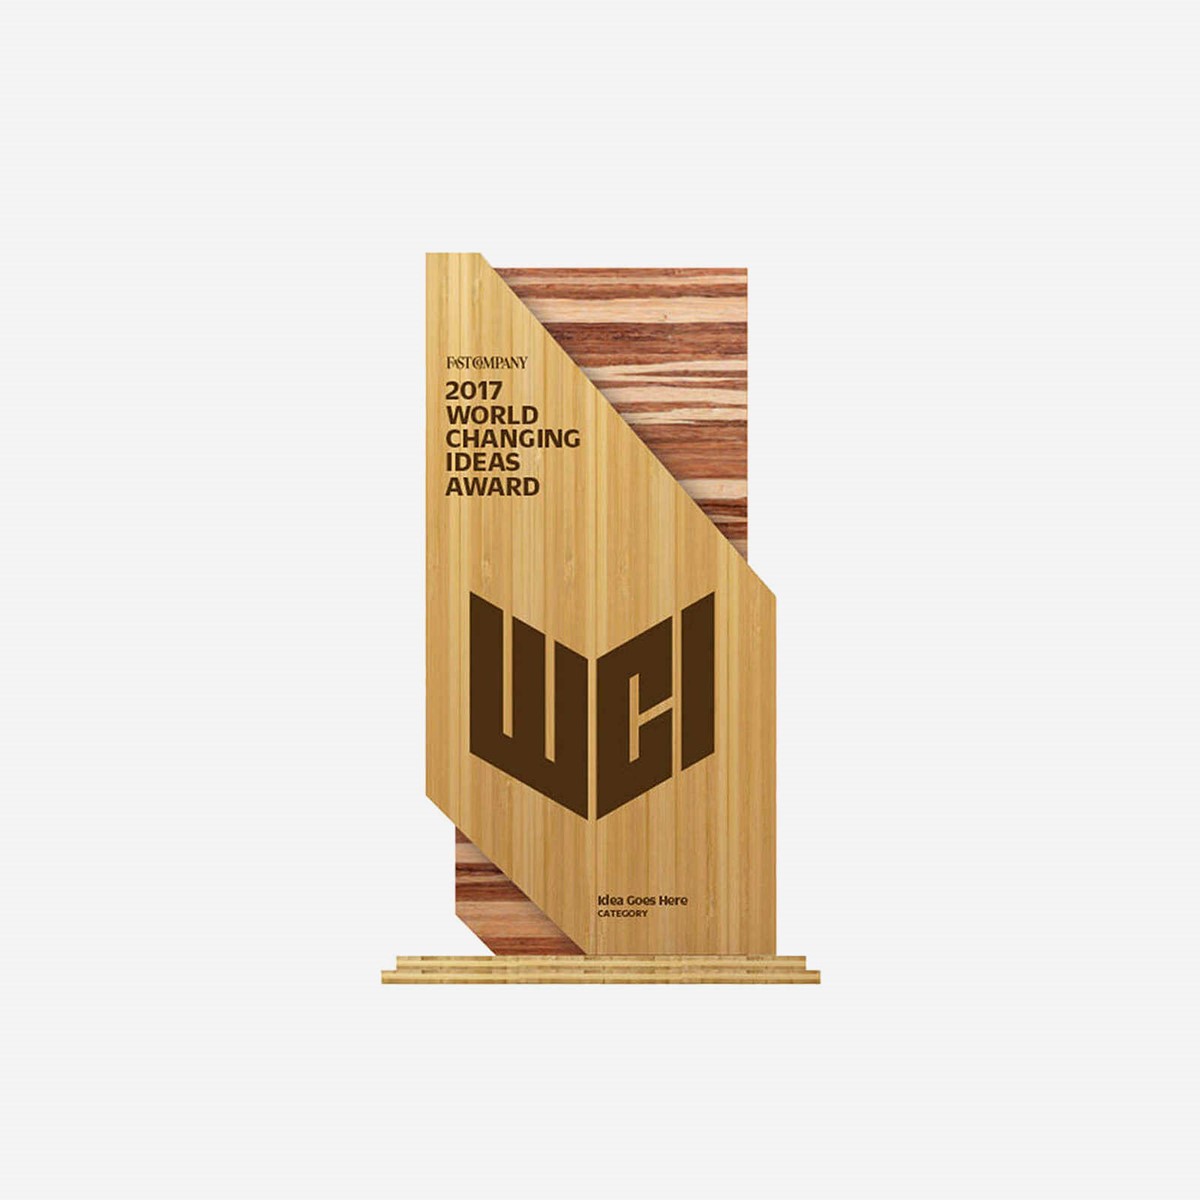 Fast Company. World Changing Ideas Award. Brand identity design by Superfried.